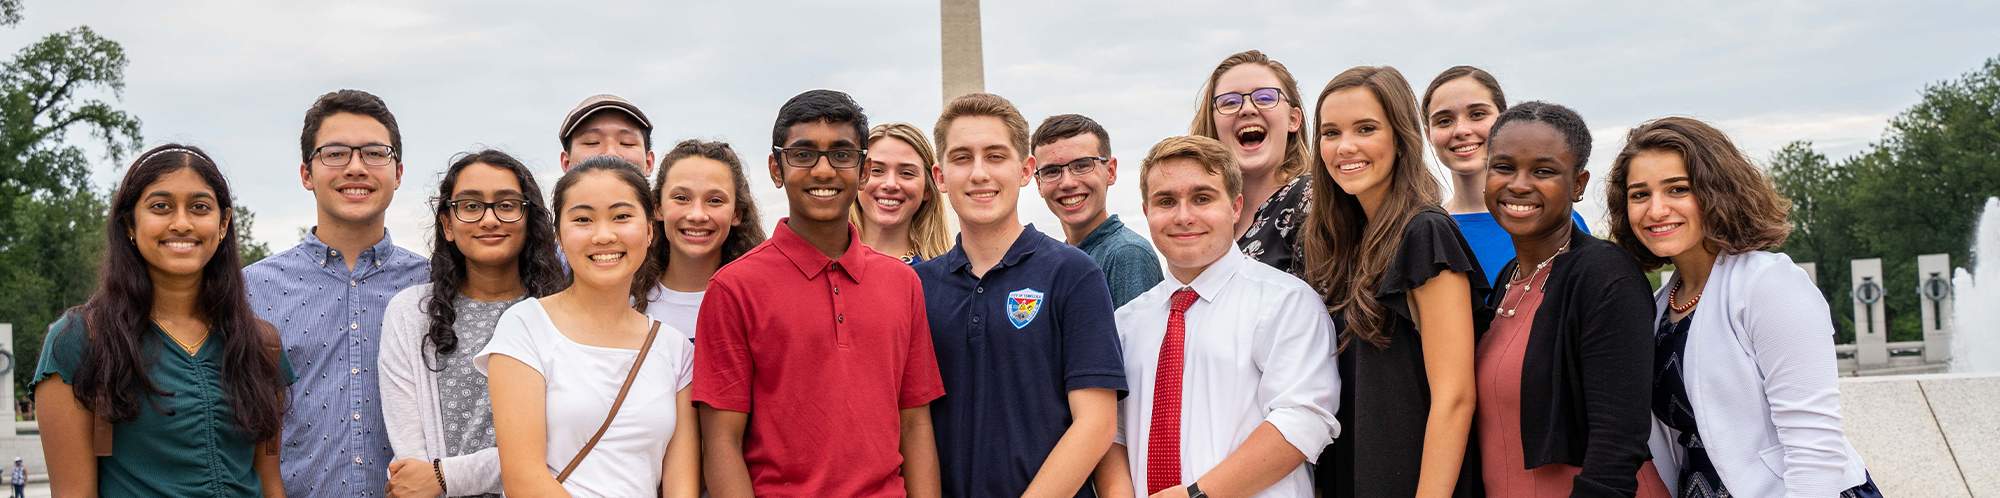 A group of teenagers stand together in front of the World War II memorial and the Washington Monument.